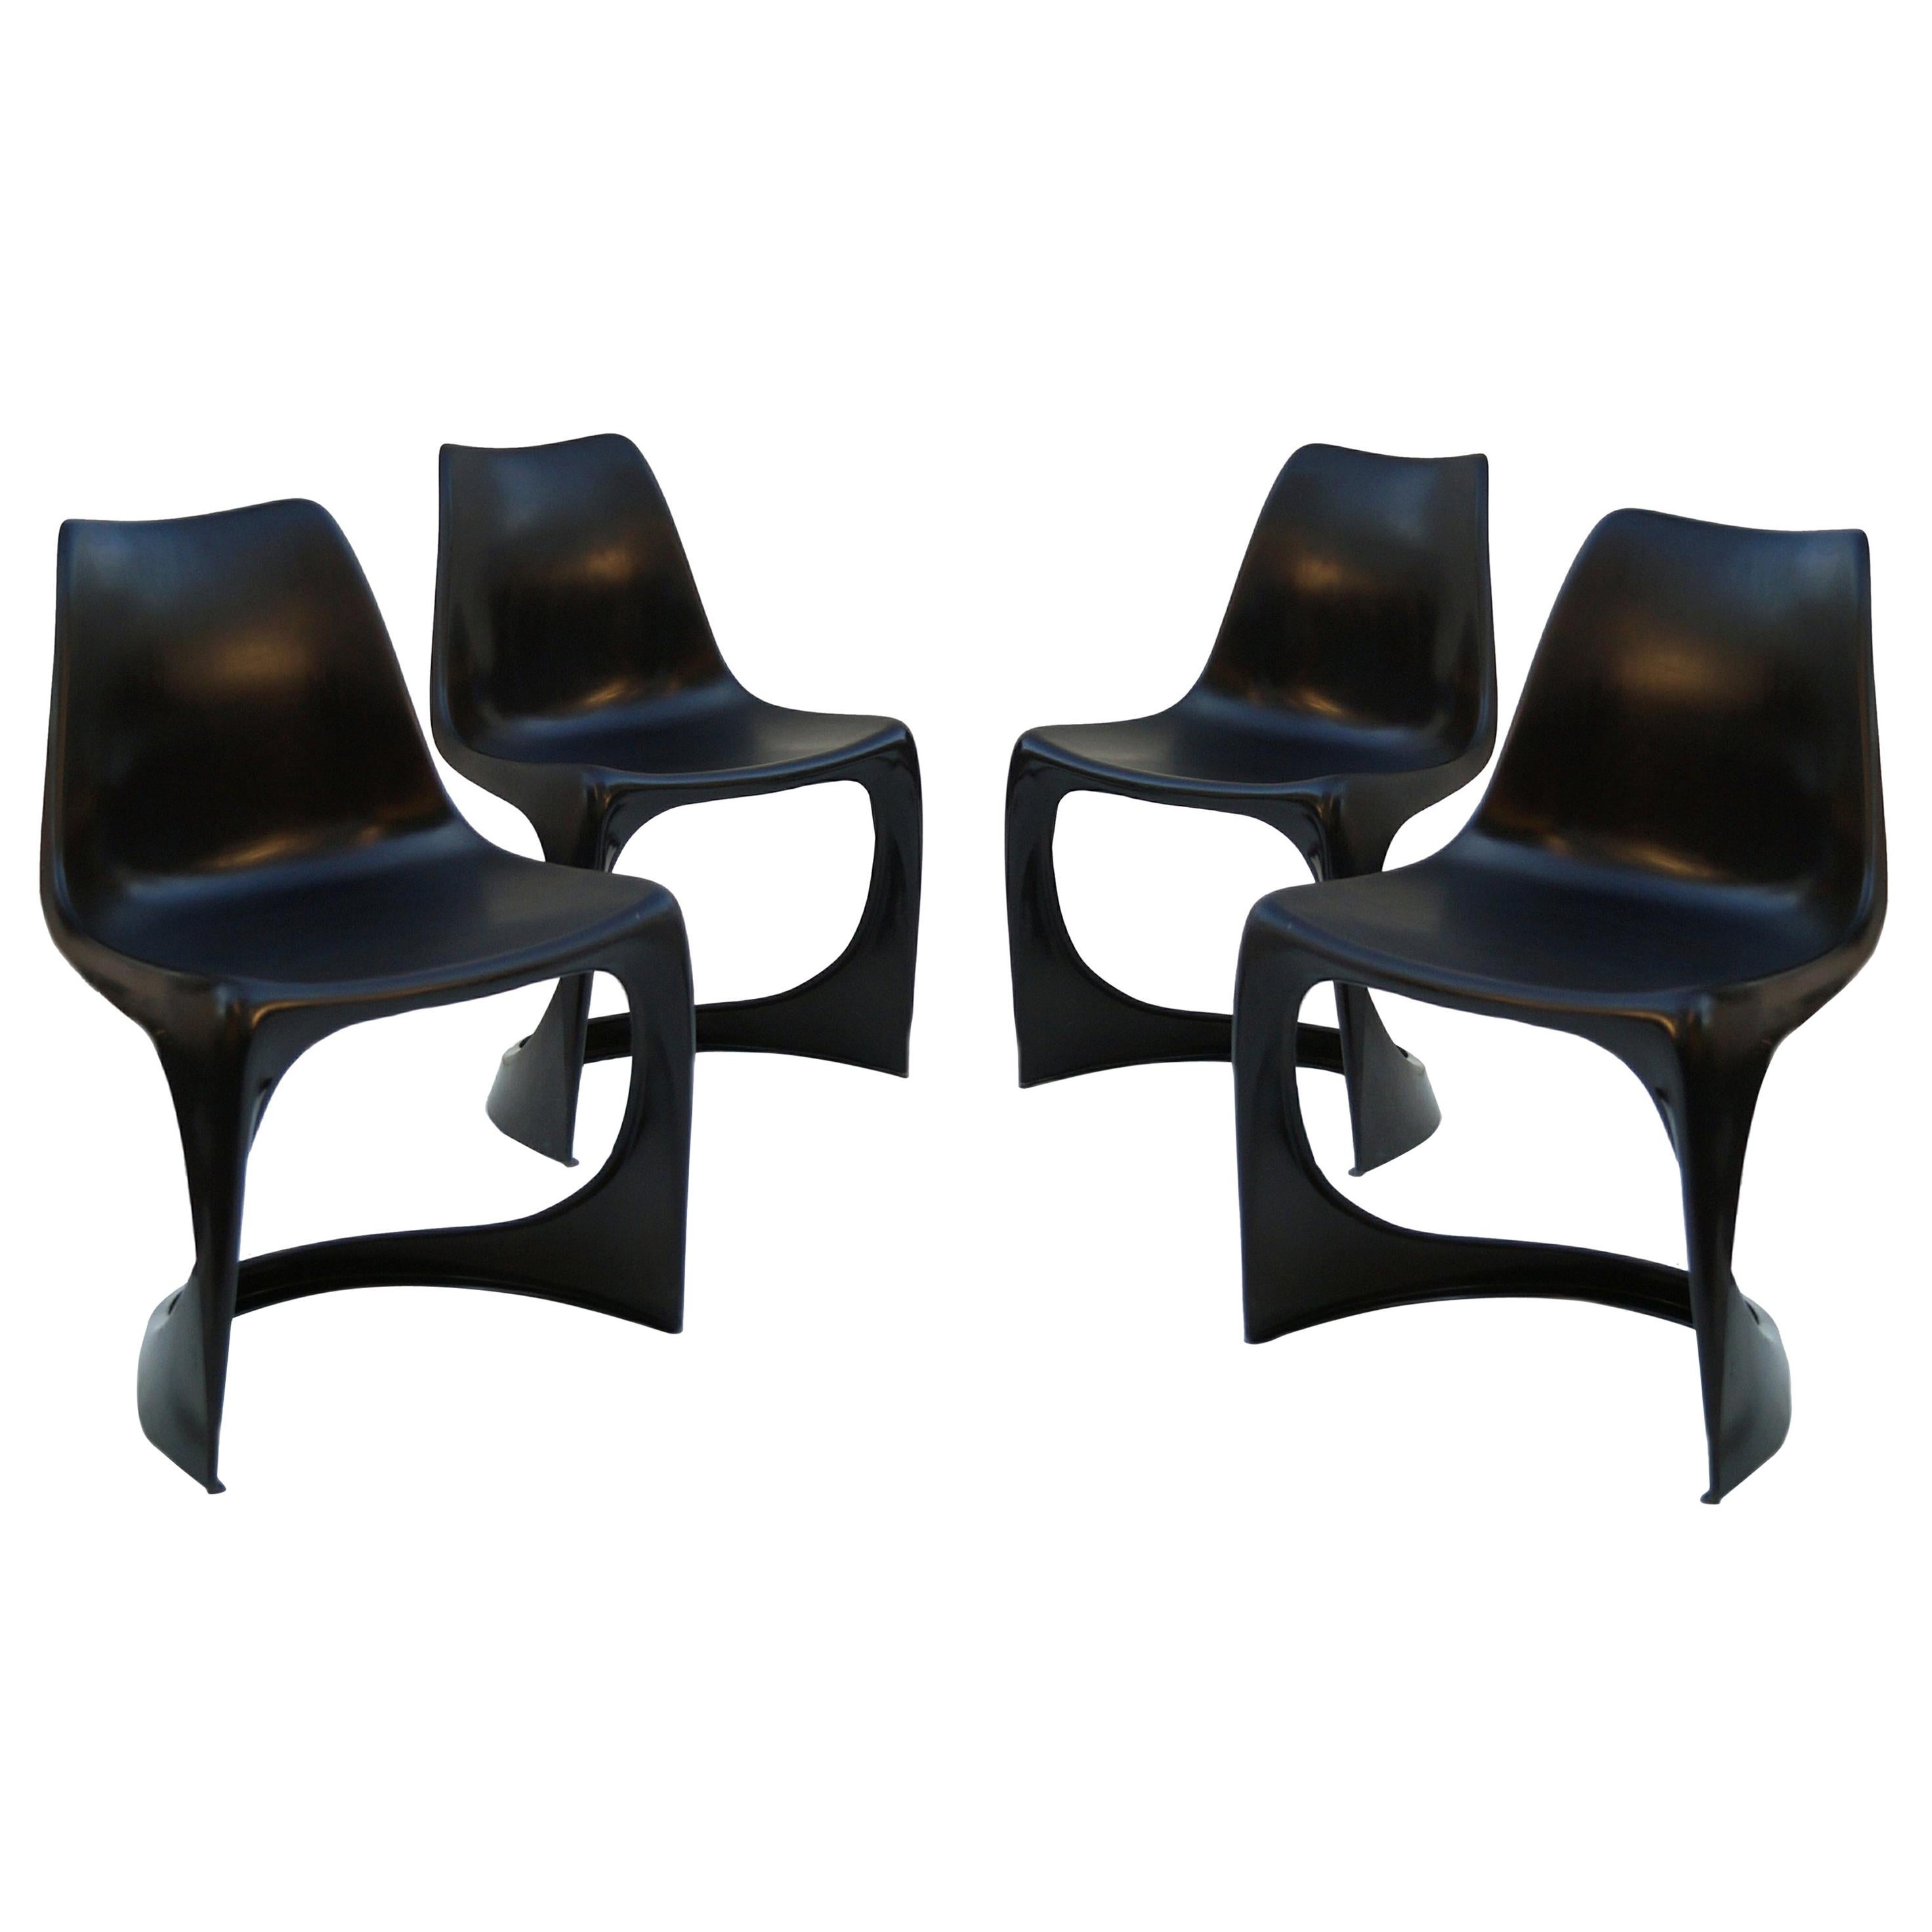 4 Danish Indoor Outdoor Stacking Dining Chairs by Steen Ostergaard Cado